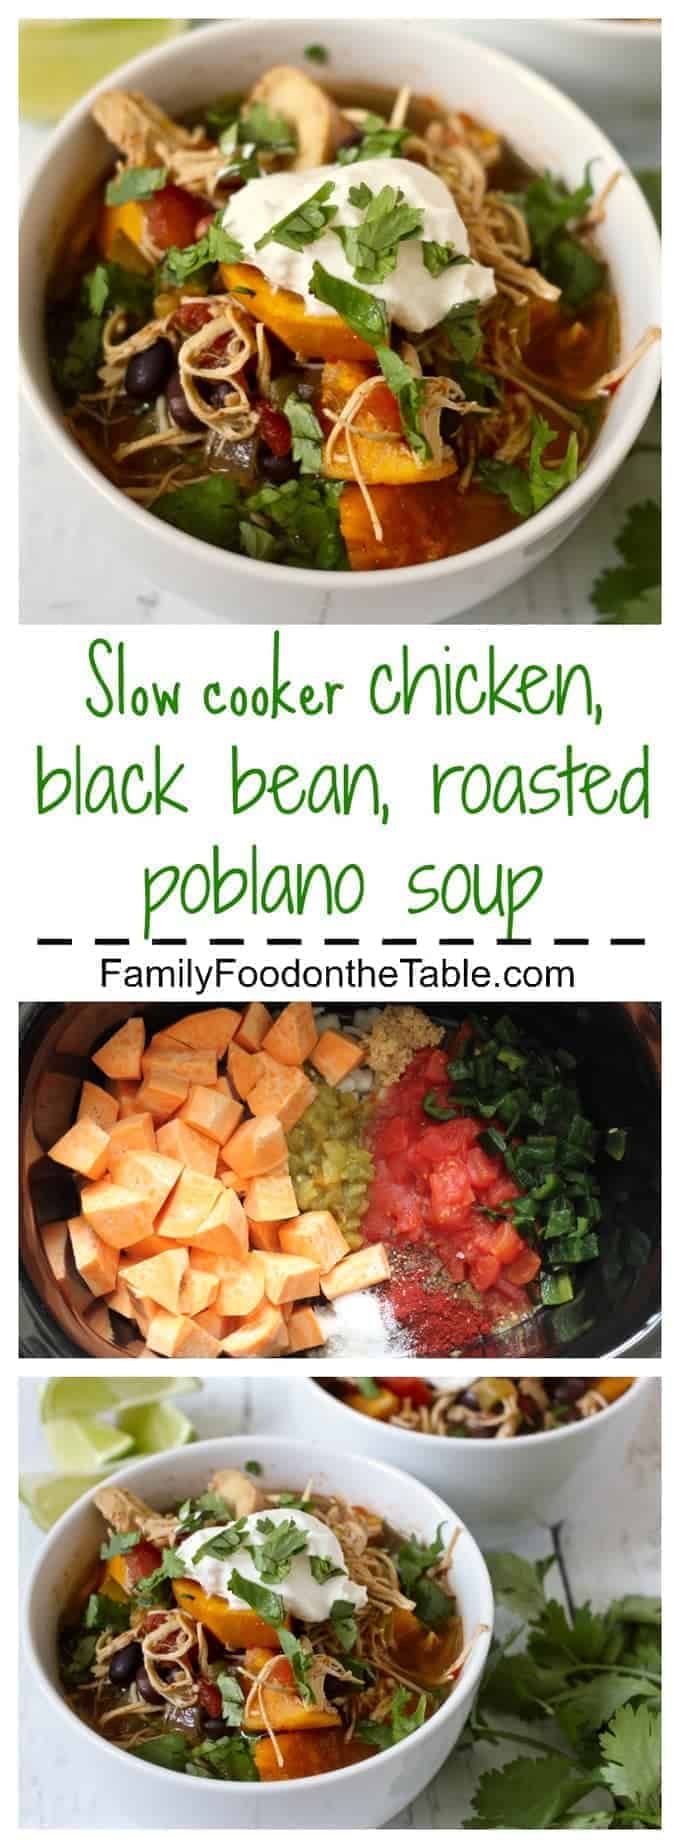 A delicious combination of chicken, black beans, sweet potatoes and roasted poblano pepper in an easy, slow cooker soup!